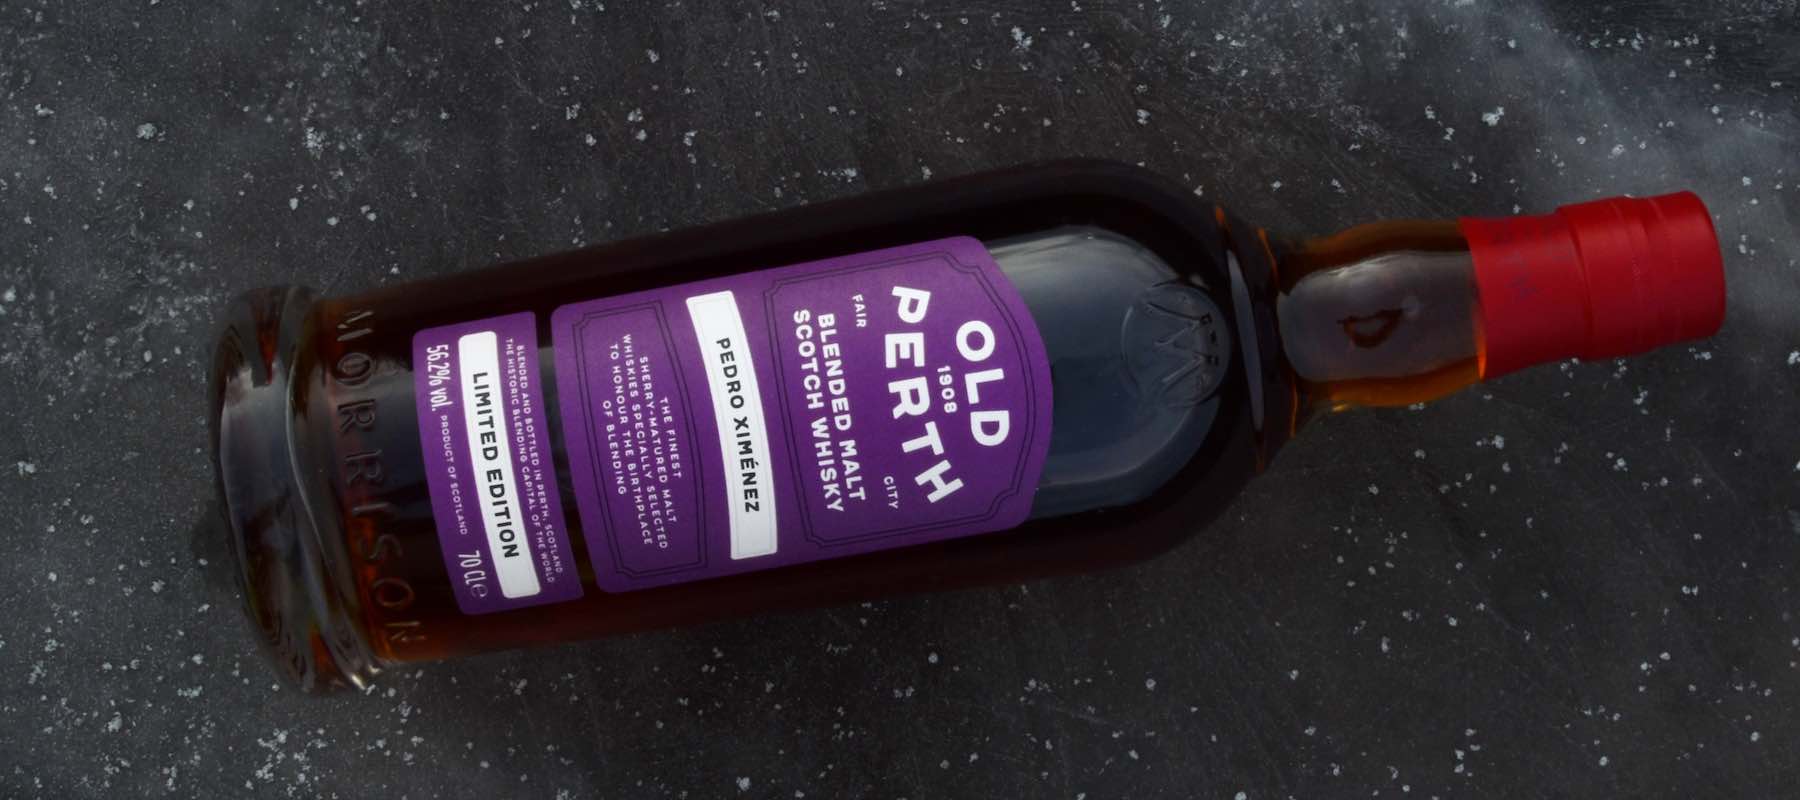 Old Perth Pedro Ximenez Limited Edition Review